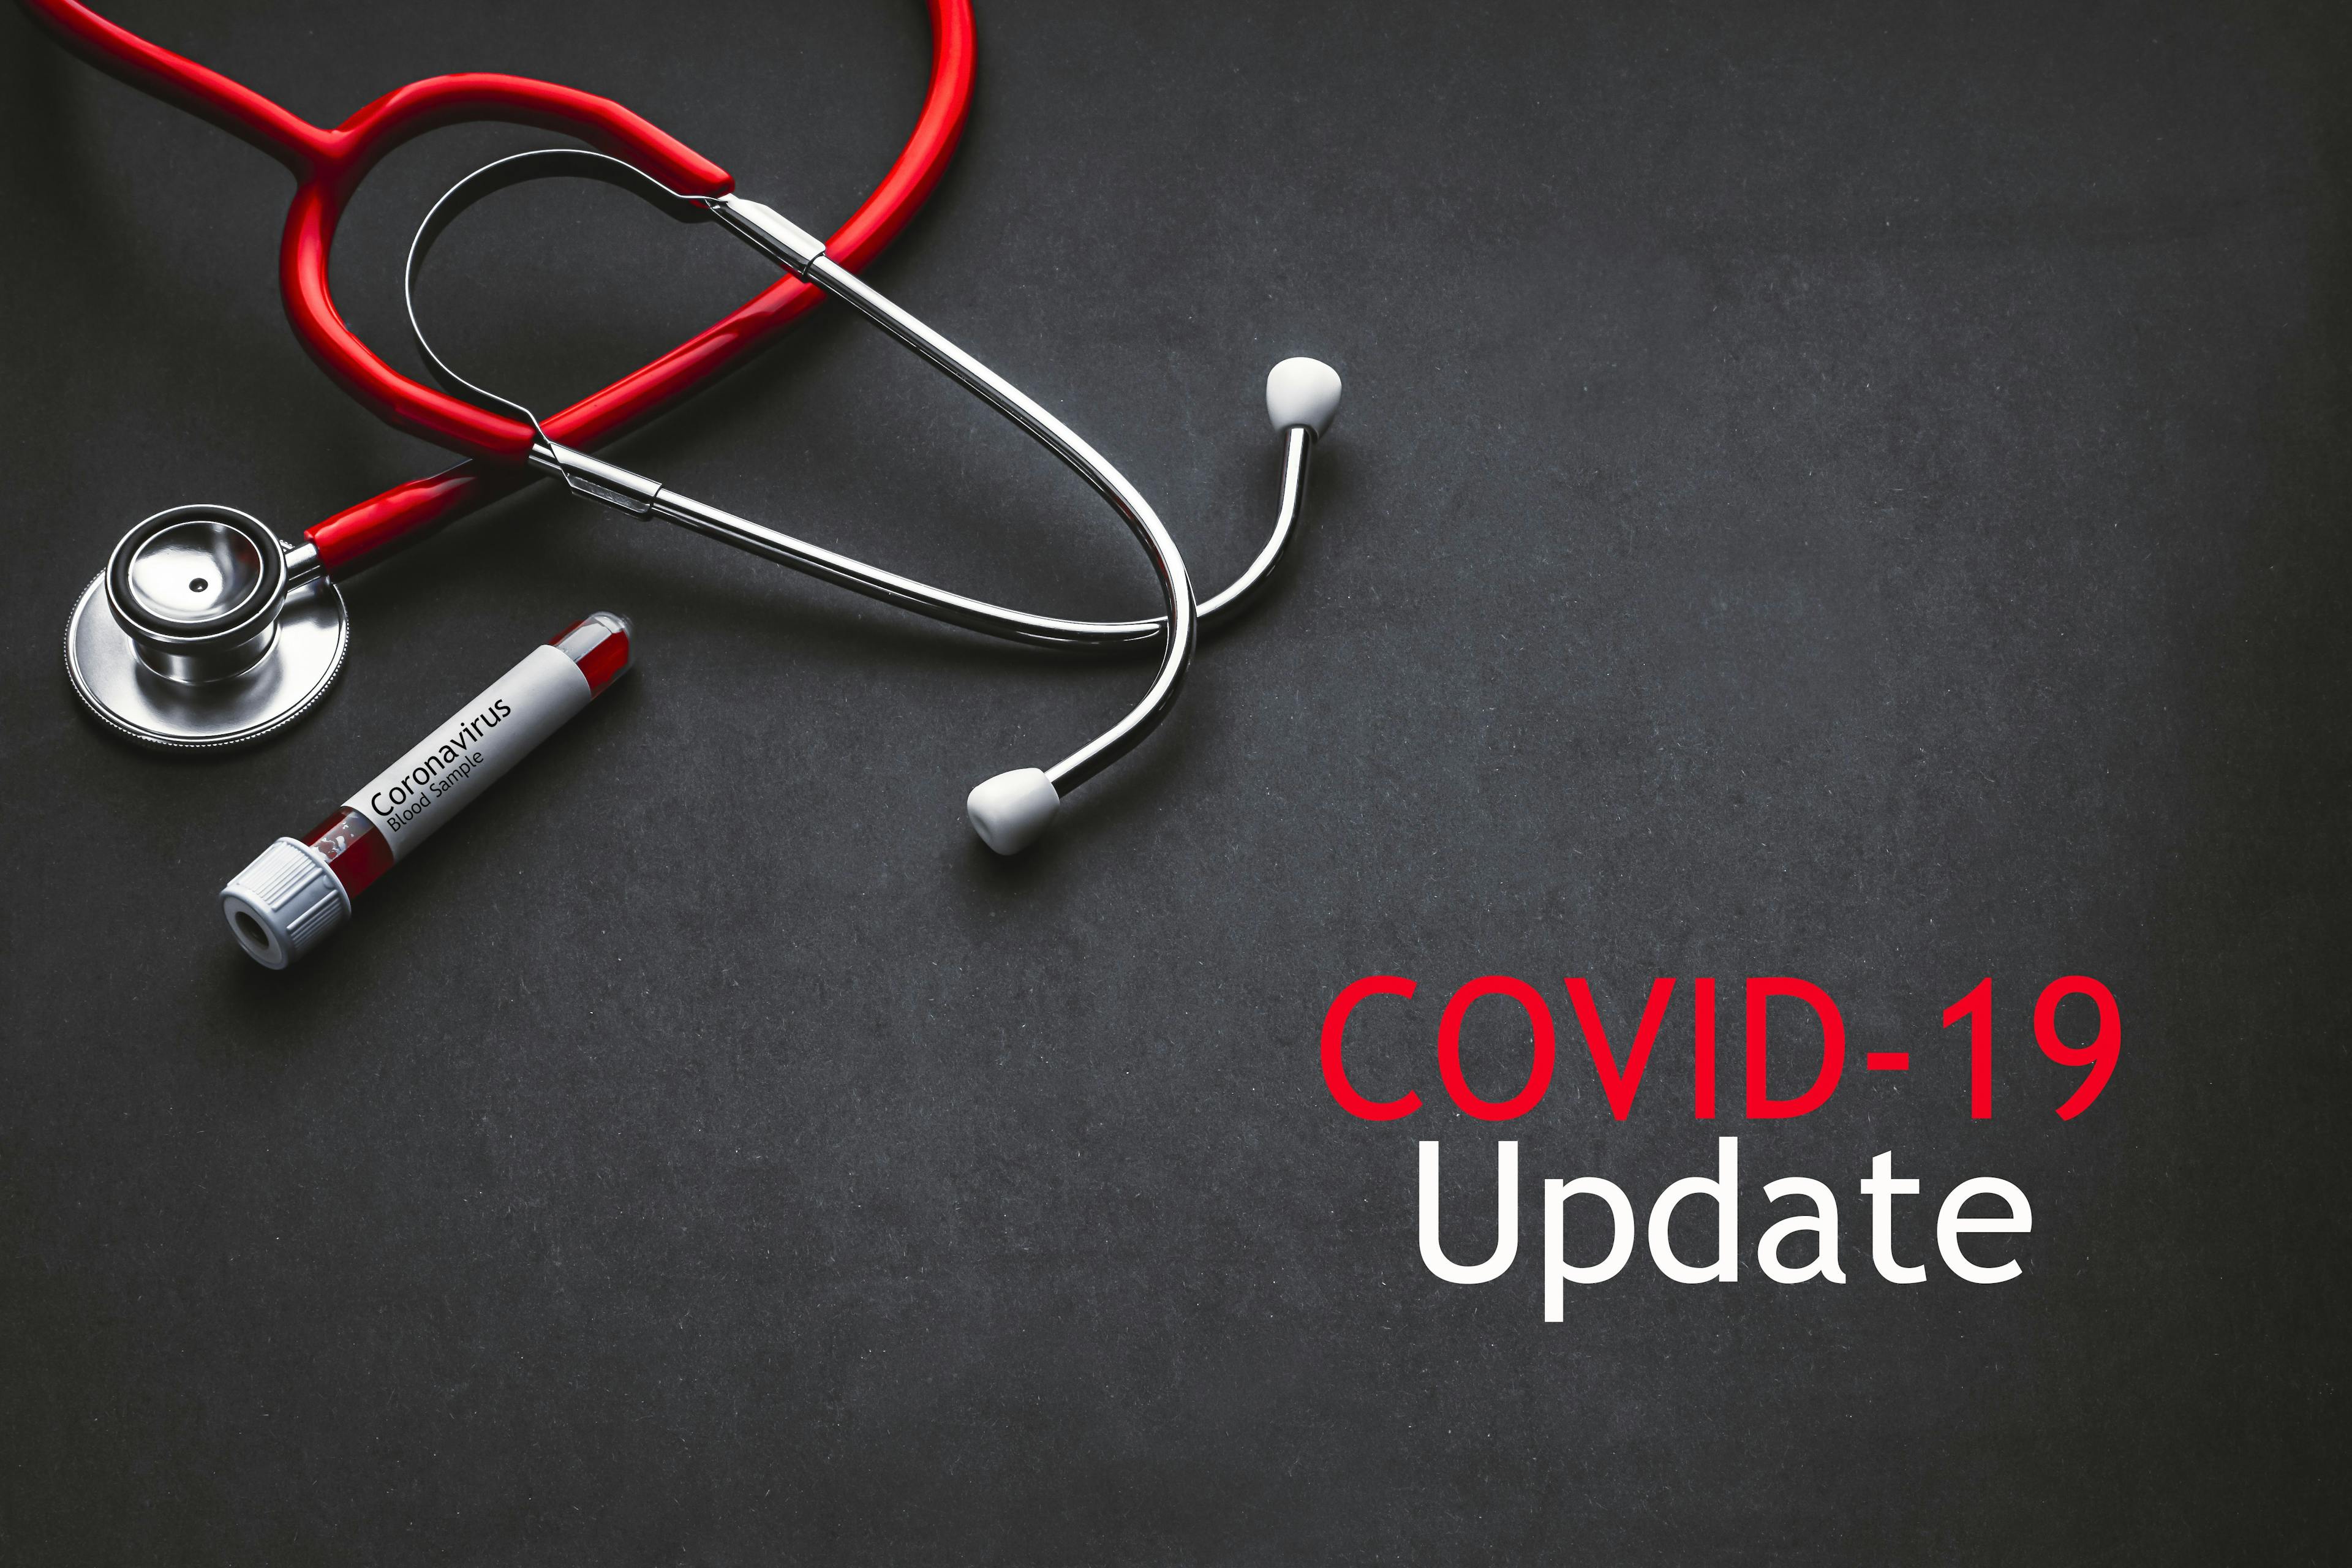 COVID-19 Update: Global Cases and Recoveries as of May 19, 2020